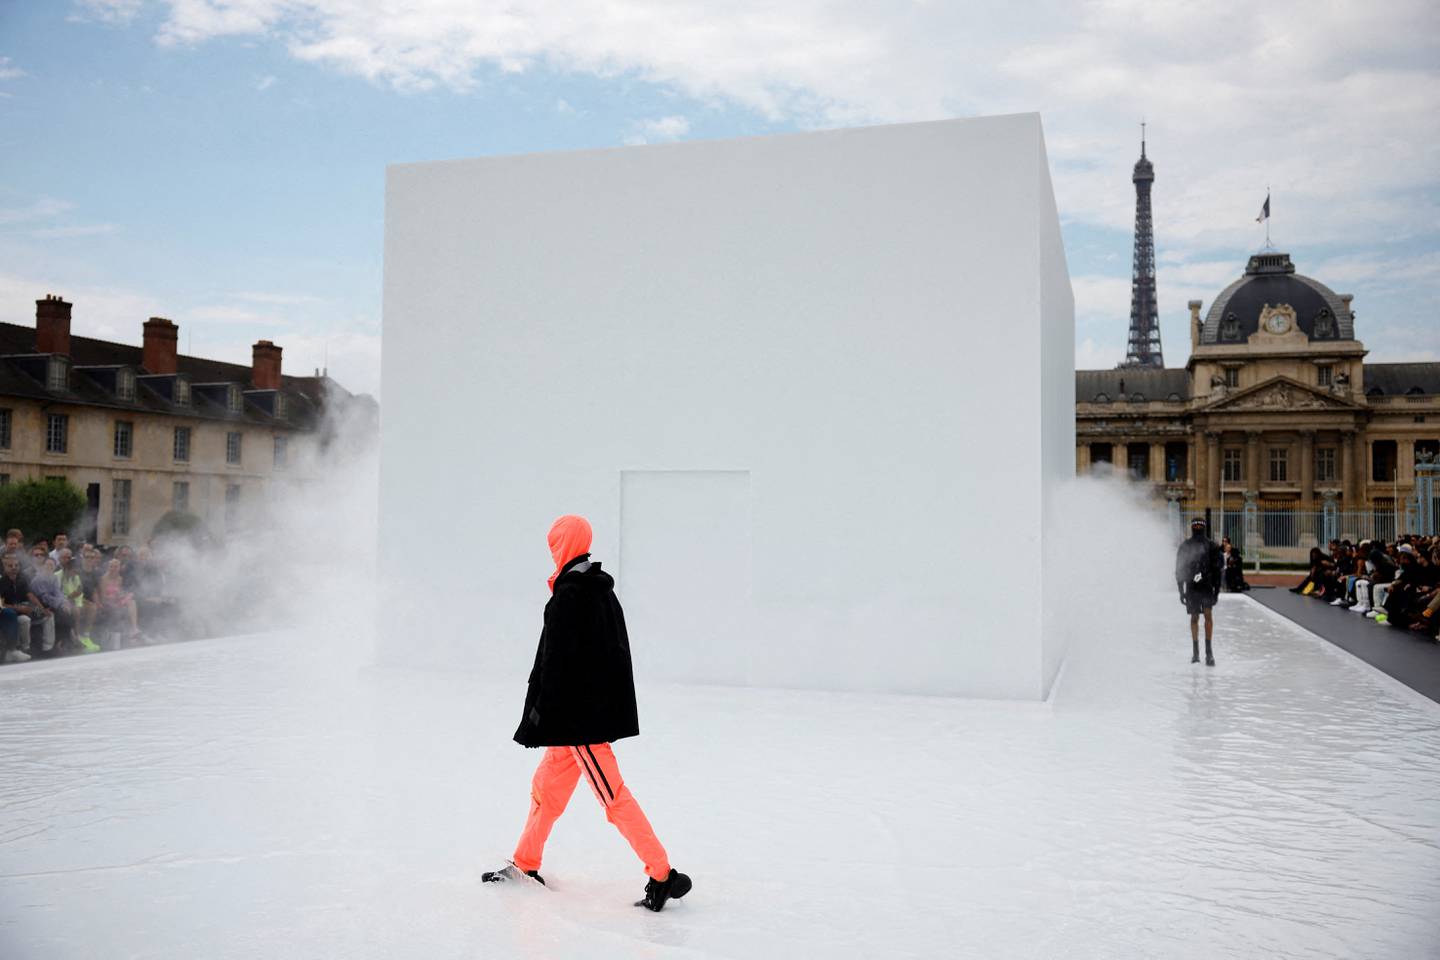 Matthew Williams's spring/summer 2023 show for Givenchy had a fluid runway of a giant font filled with milky-white water and frothing mist, in the courtyard of the Ecole Militaire. Reuters